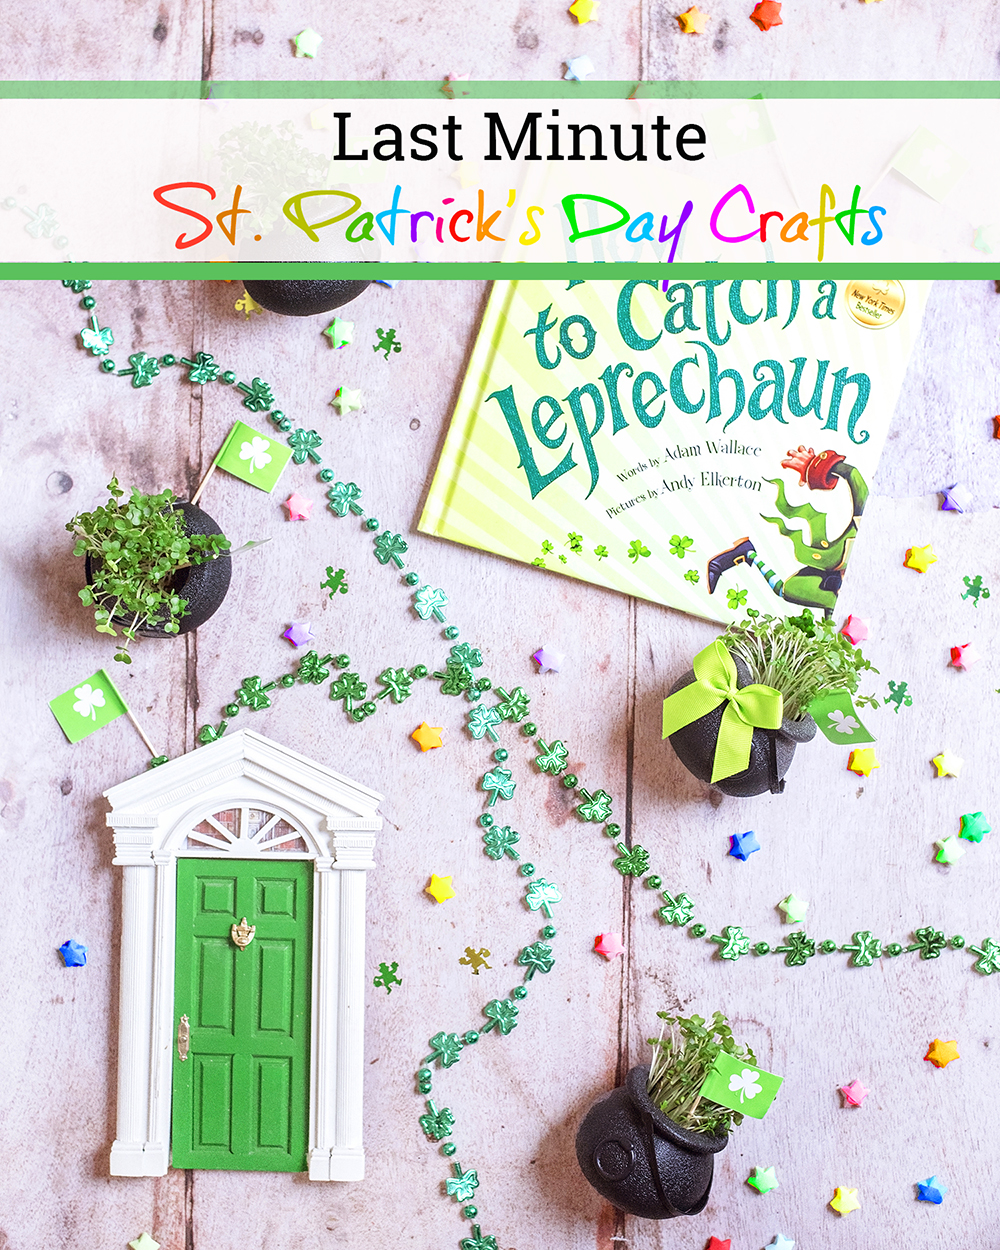 Easy to make Last Minute St. Patrick's Day Crafts.